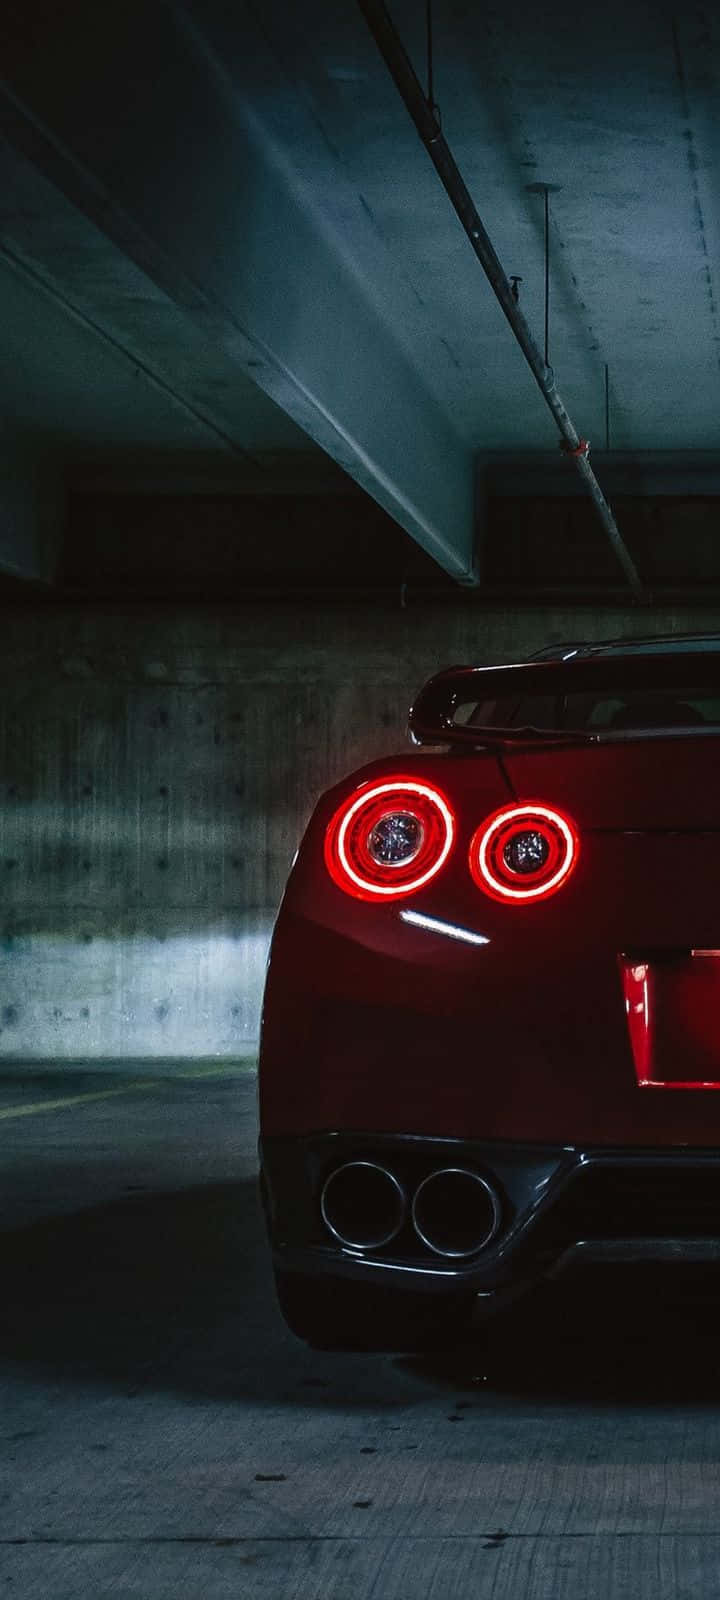 Signature Red Edition Nissan GT-R Wallpaper